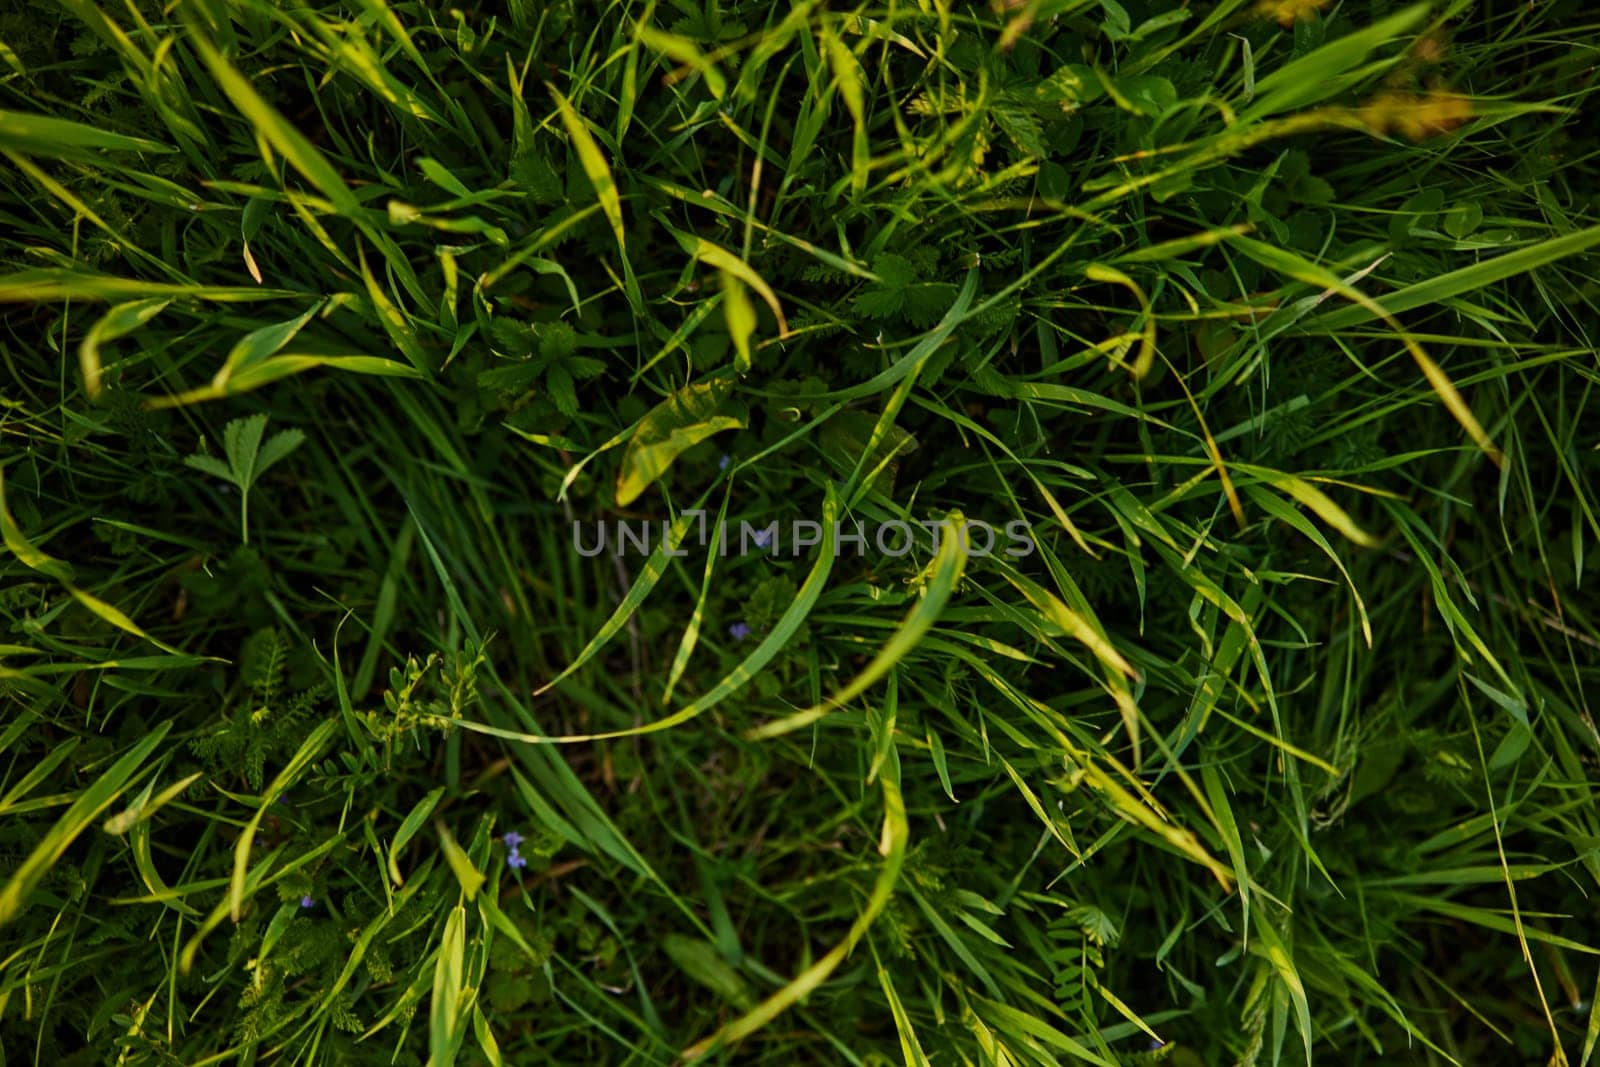 a close horizontal photo of the texture of high summer grass of rich green color taken from above by Vichizh